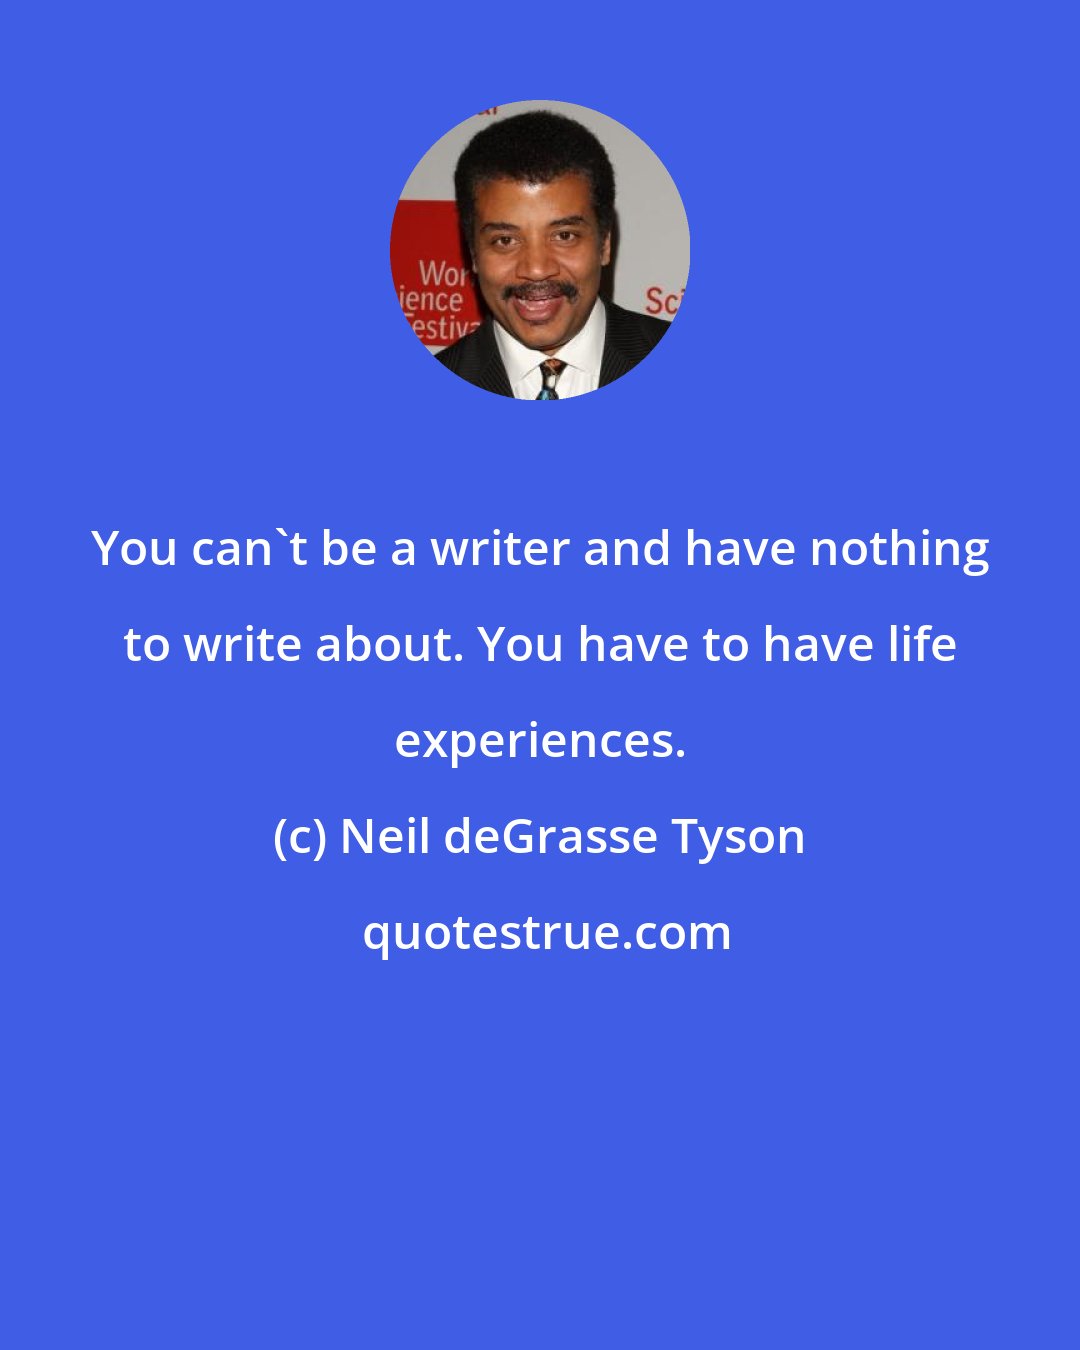 Neil deGrasse Tyson: You can't be a writer and have nothing to write about. You have to have life experiences.